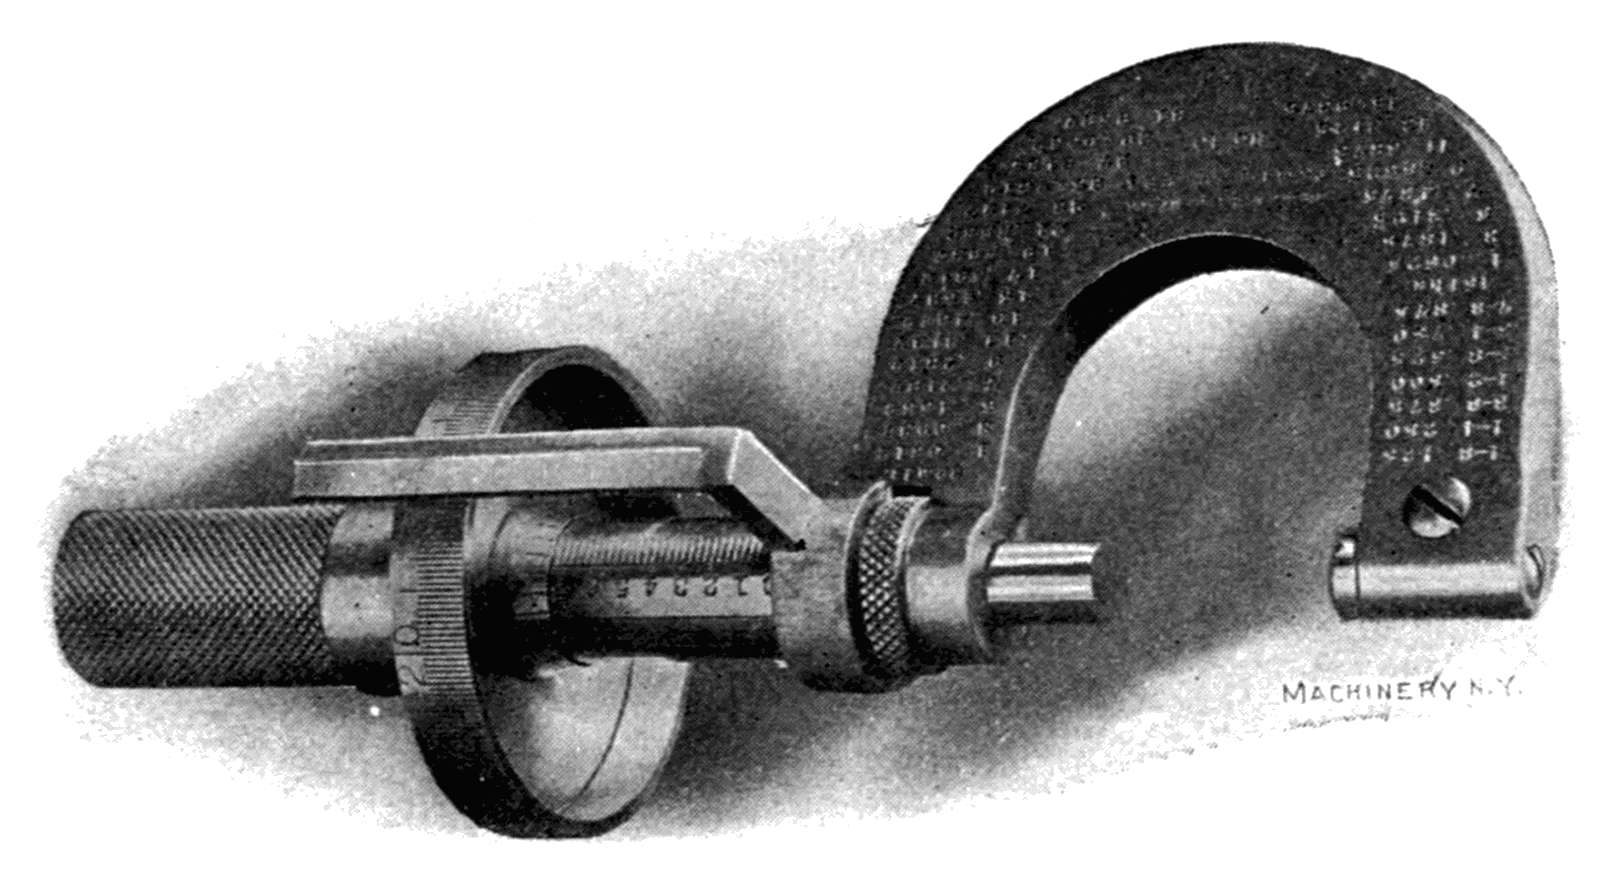 Fig. 24. Micrometer with Attachment for Reading Ten-thousandths of an Inch